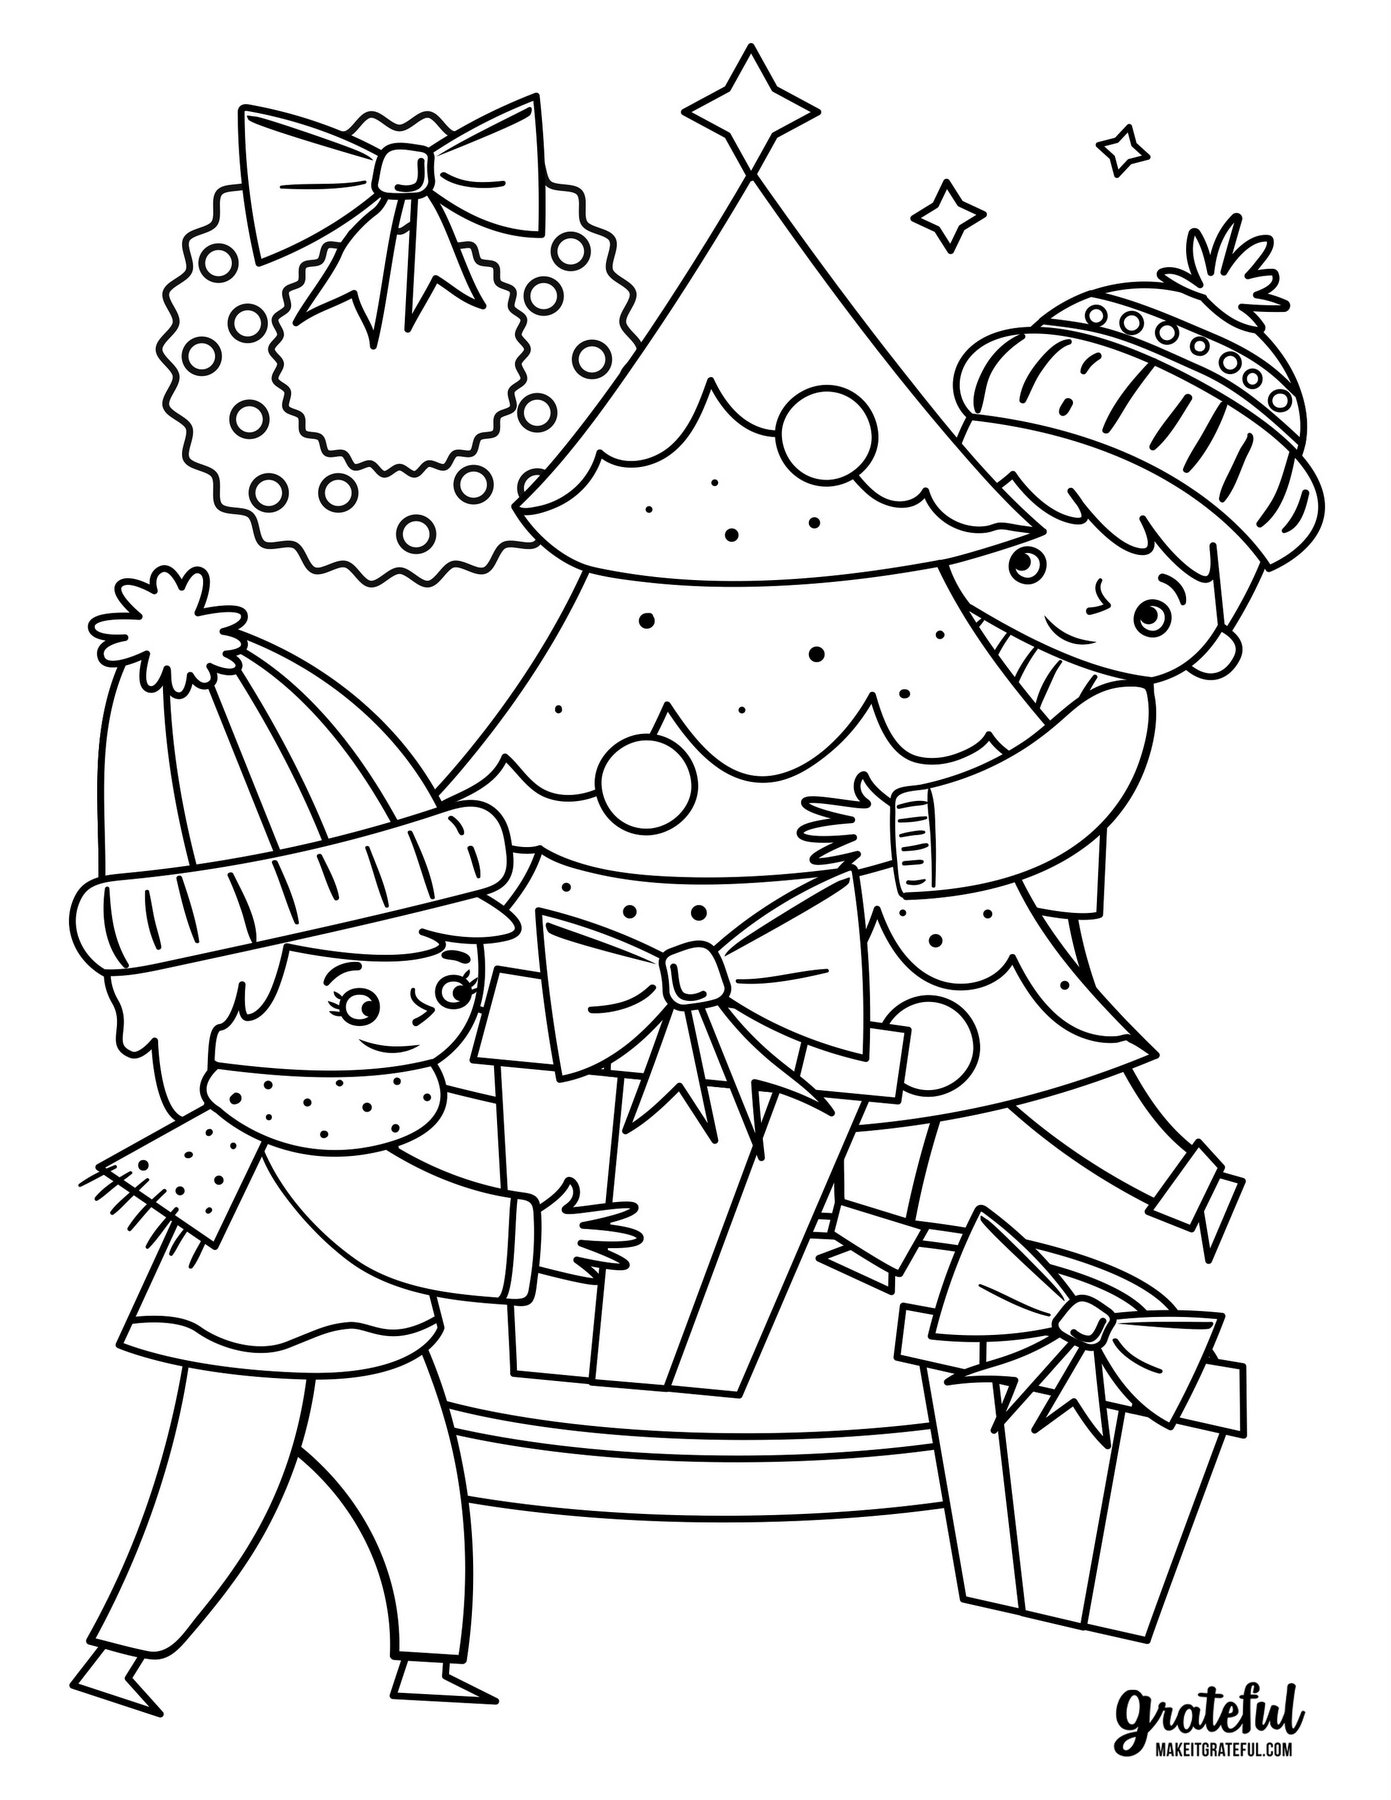 5 Christmas coloring pages your kids will love